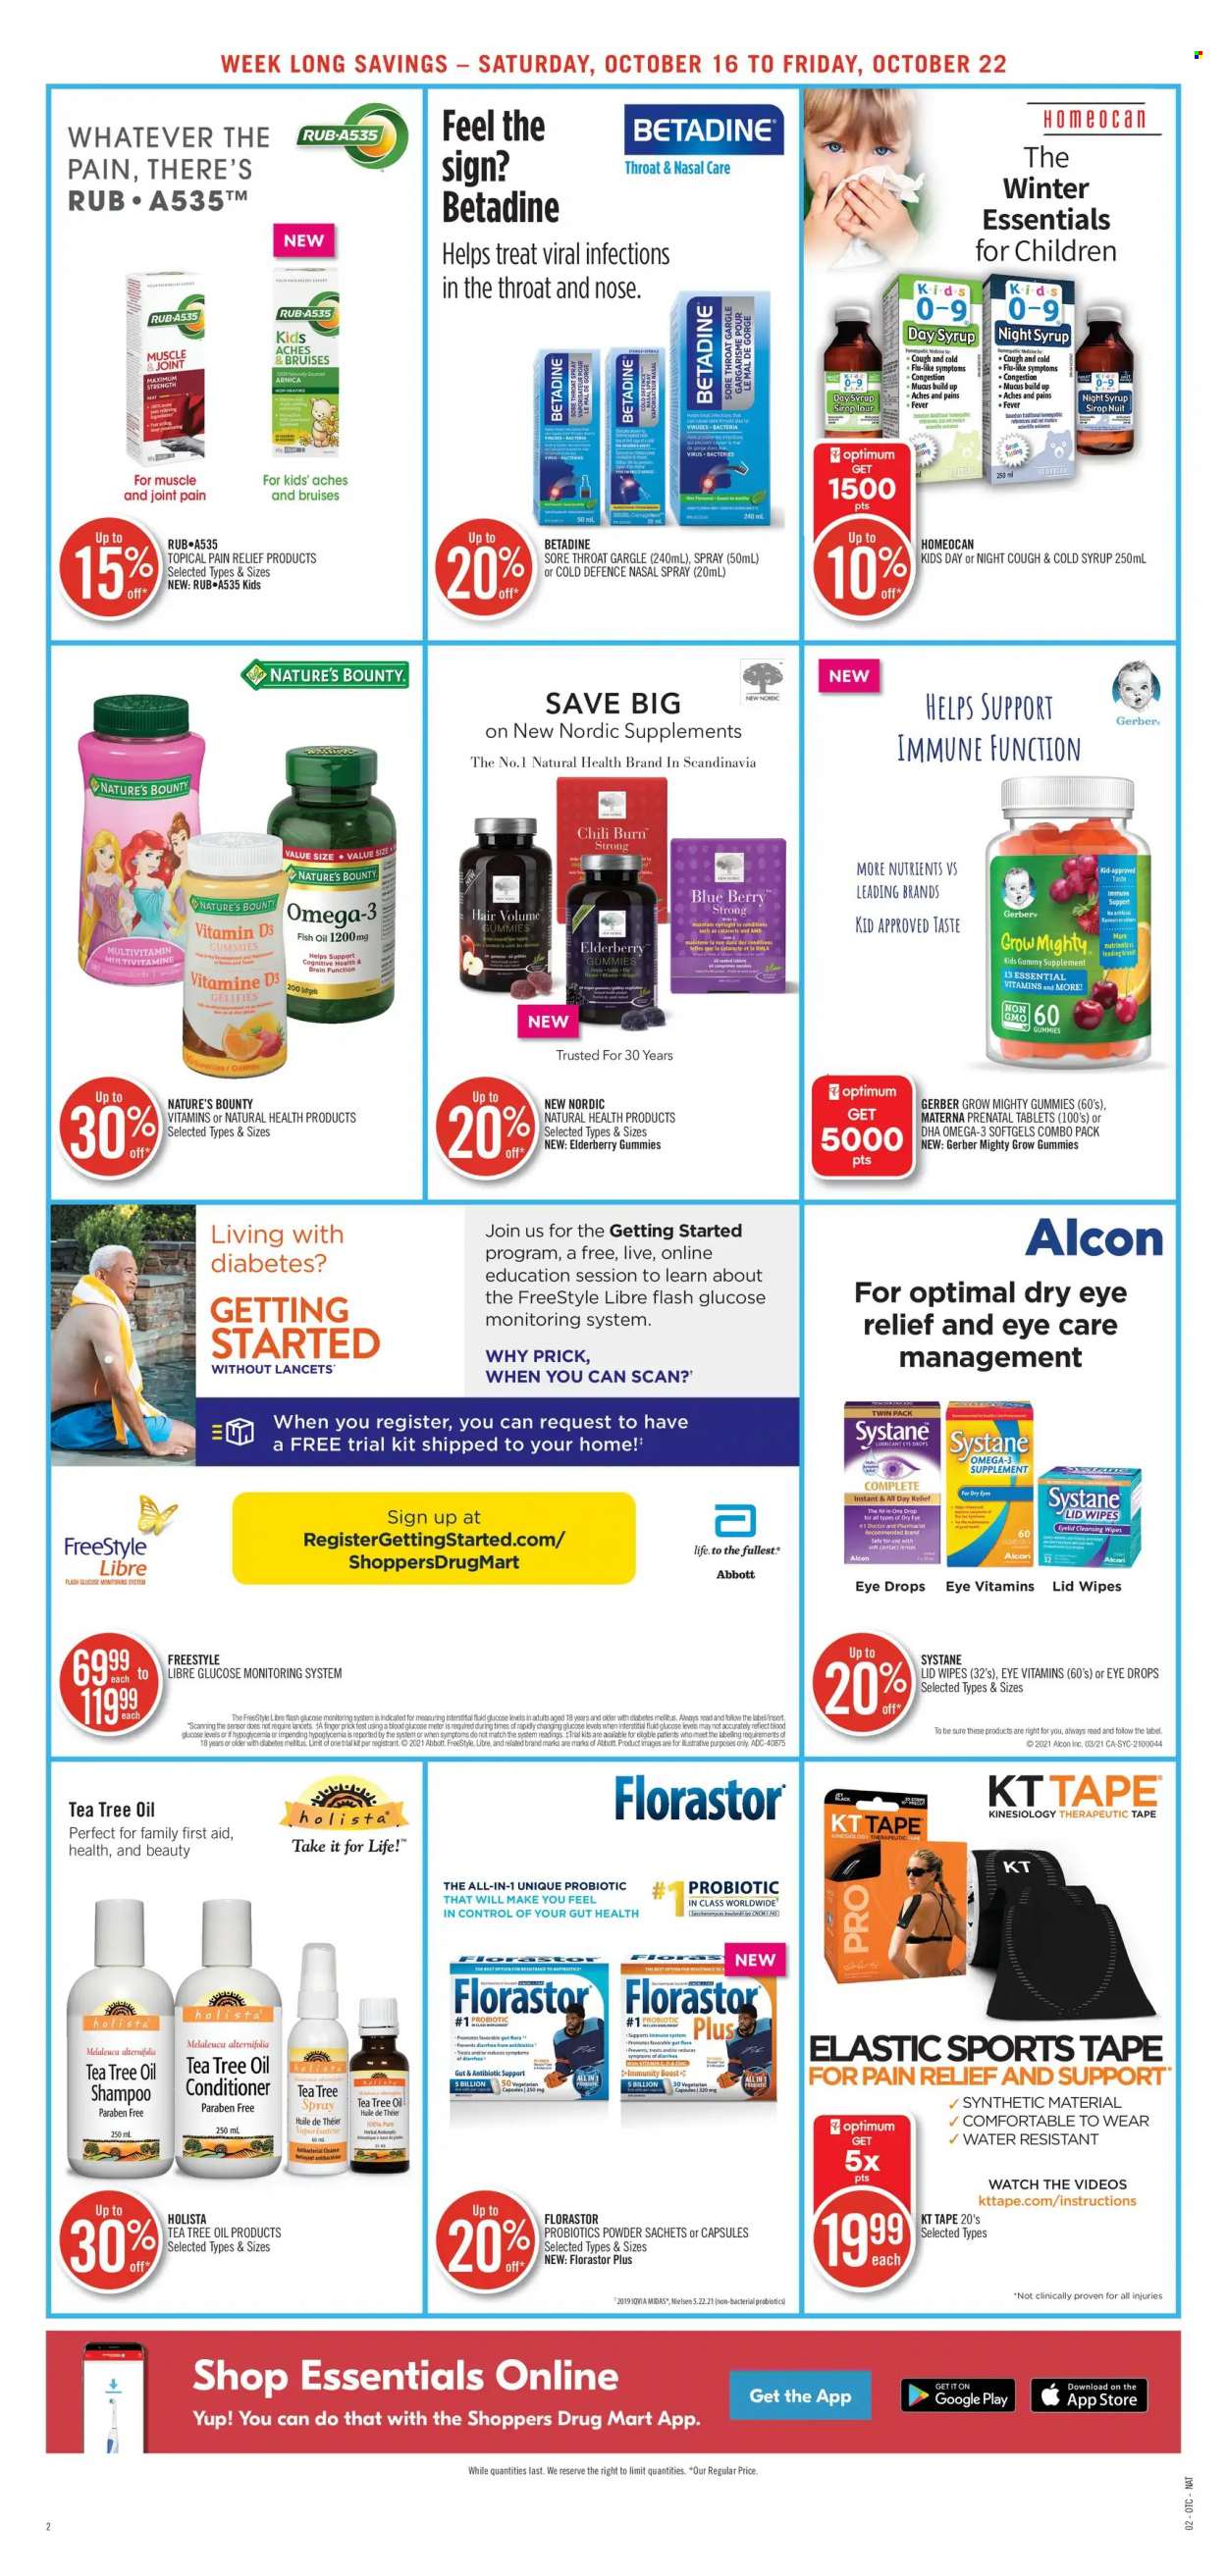 thumbnail - Circulaire Shoppers Drug Mart - 16 Octobre 2021 - 22 Octobre 2021 - Produits soldés - huile, sirop, shampooing, Always, Systane. Page 5.